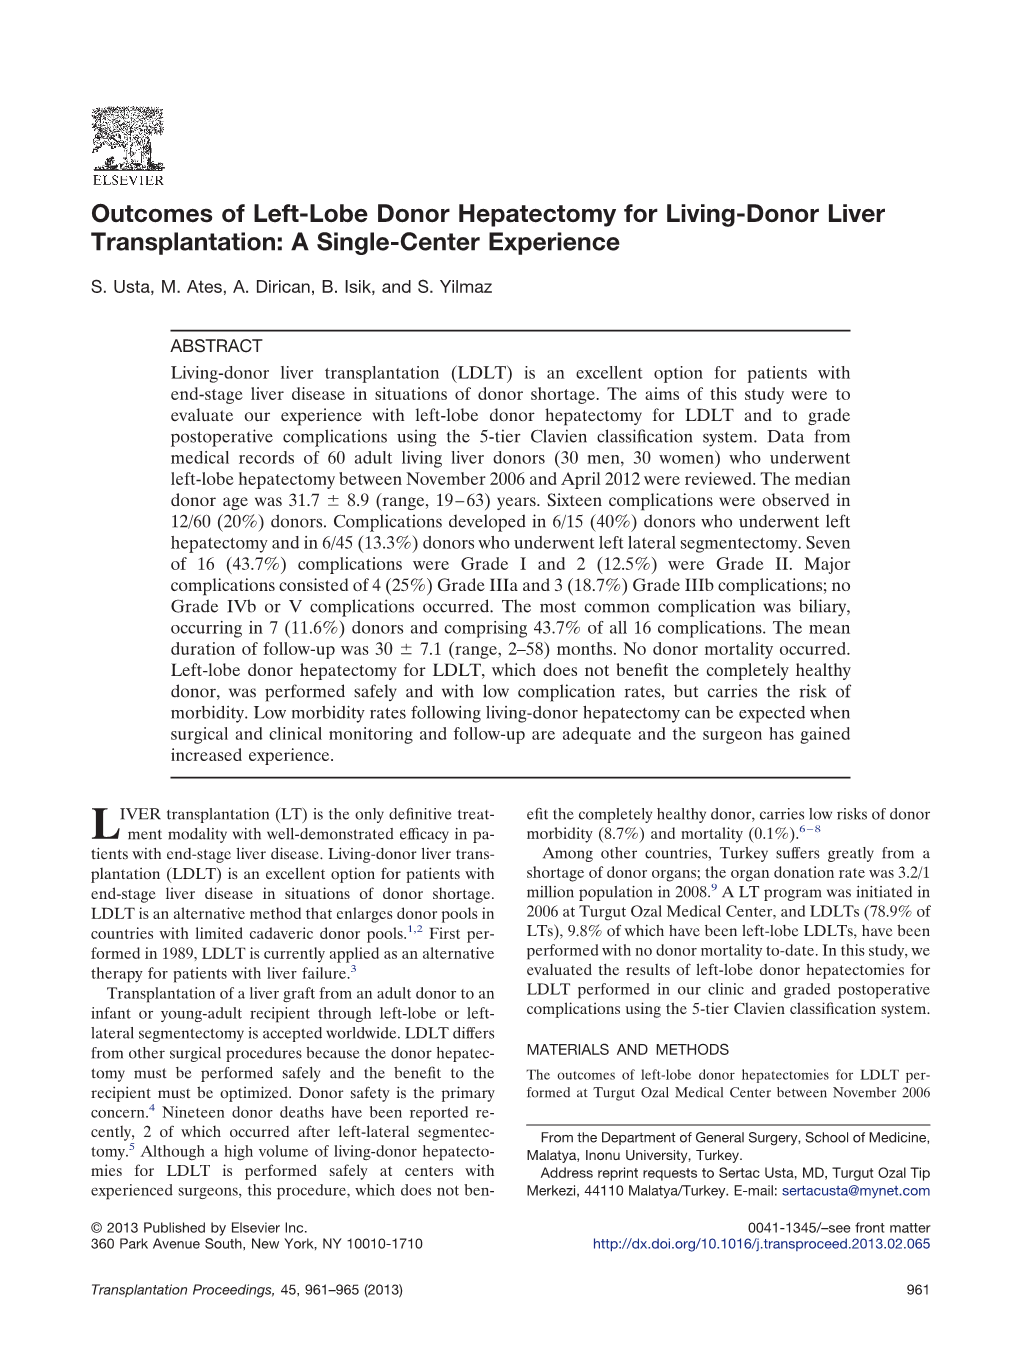 Outcomes of Left-Lobe Donor Hepatectomy for Living-Donor Liver Transplantation: a Single-Center Experience